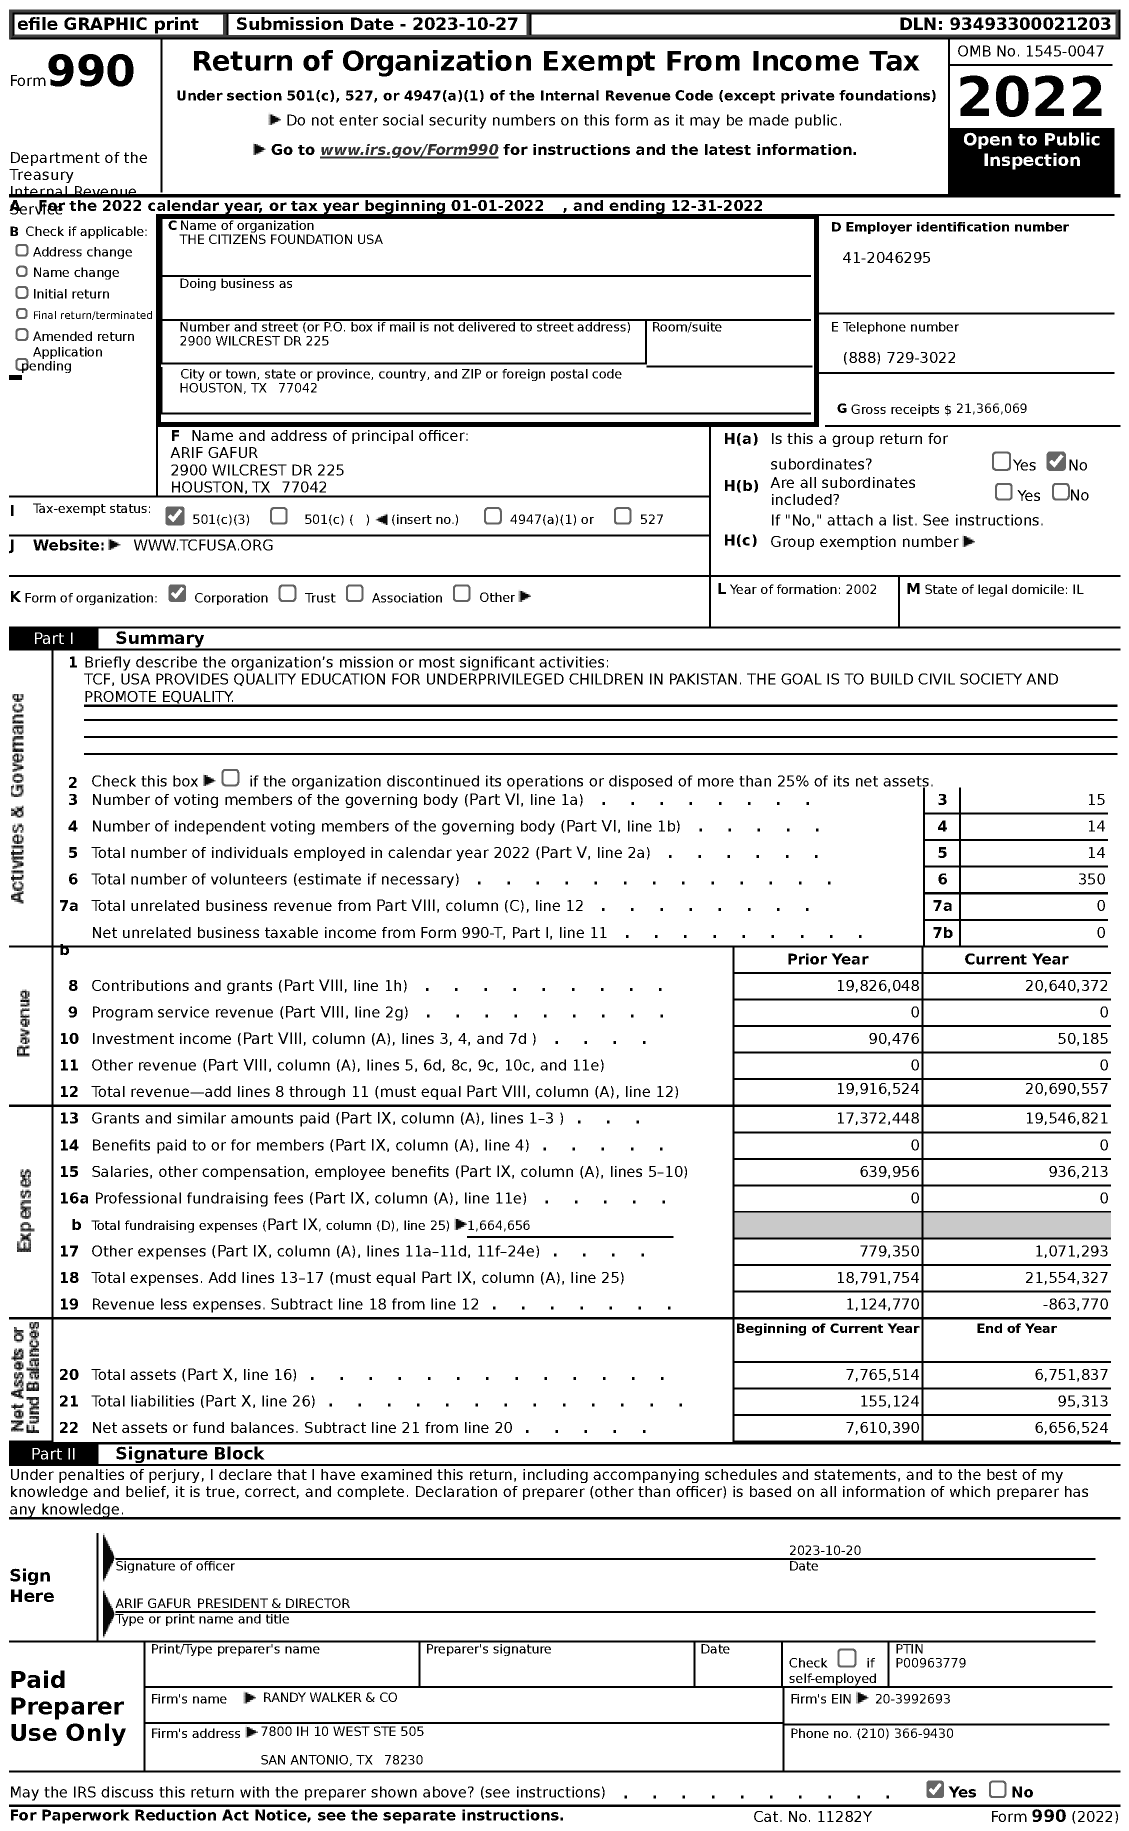 Image of first page of 2022 Form 990 for The Citizens Foundation USA (TCF-USA)